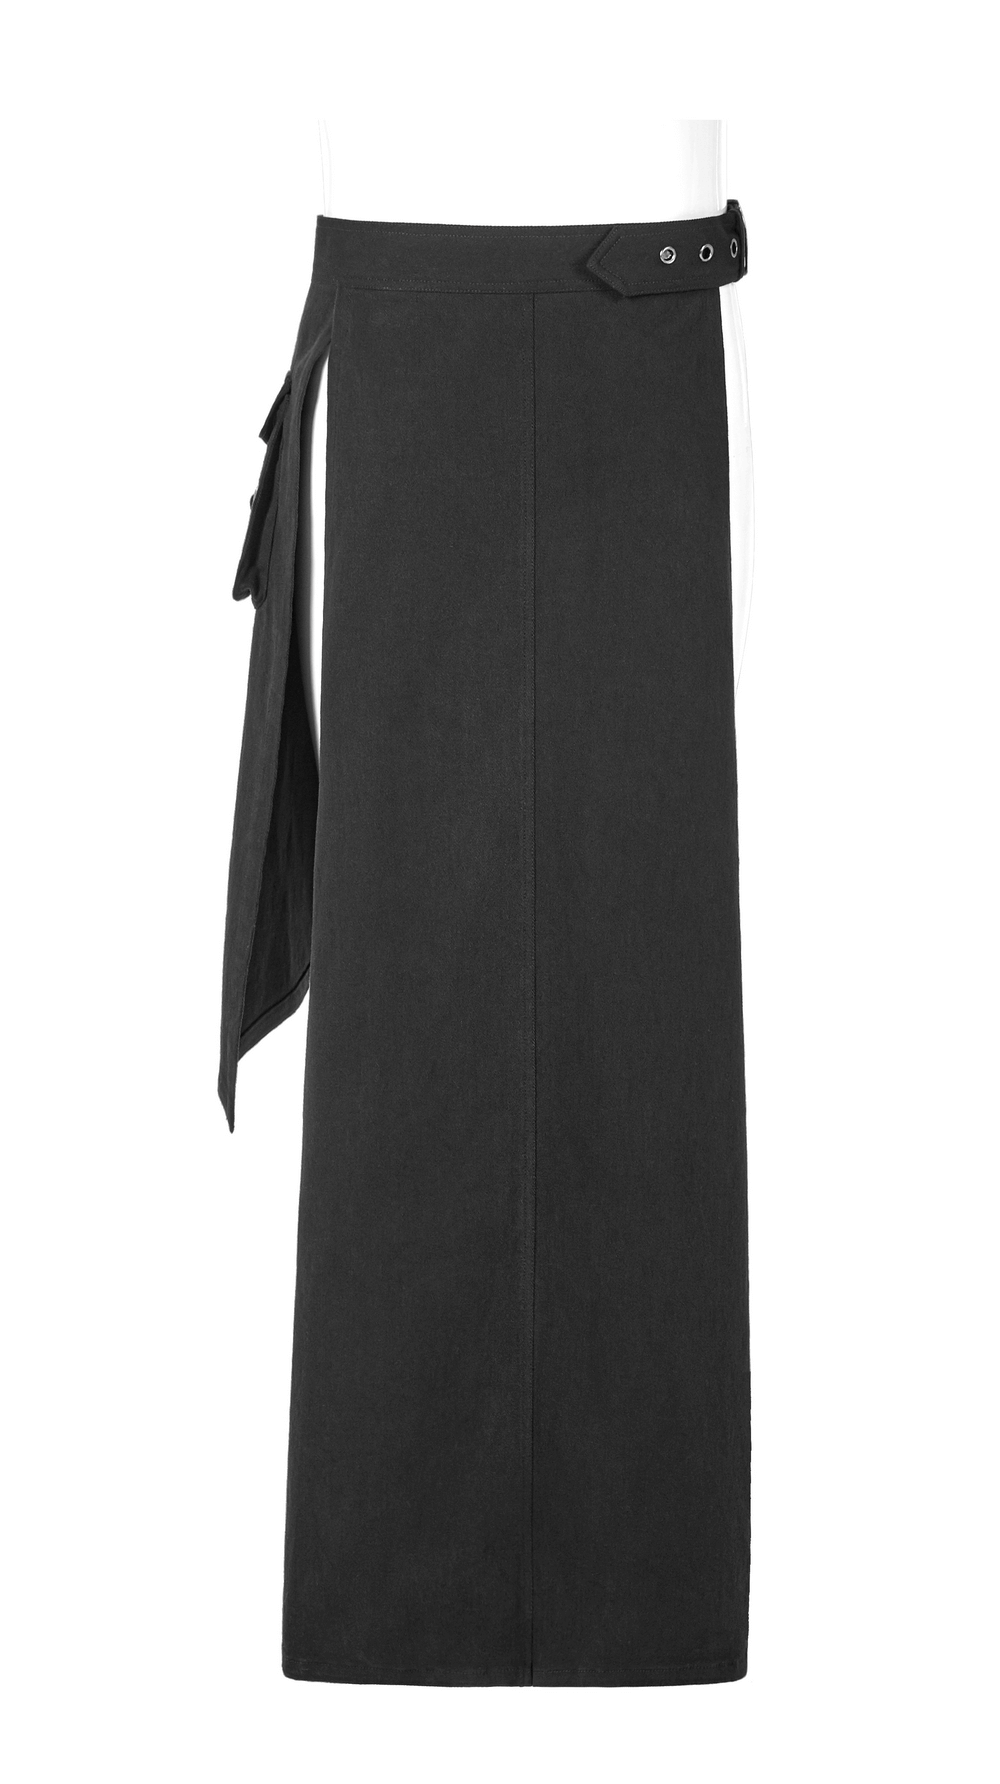 Black Gothic Punk Half Apron Skirt with Buckle Straps and Pockets